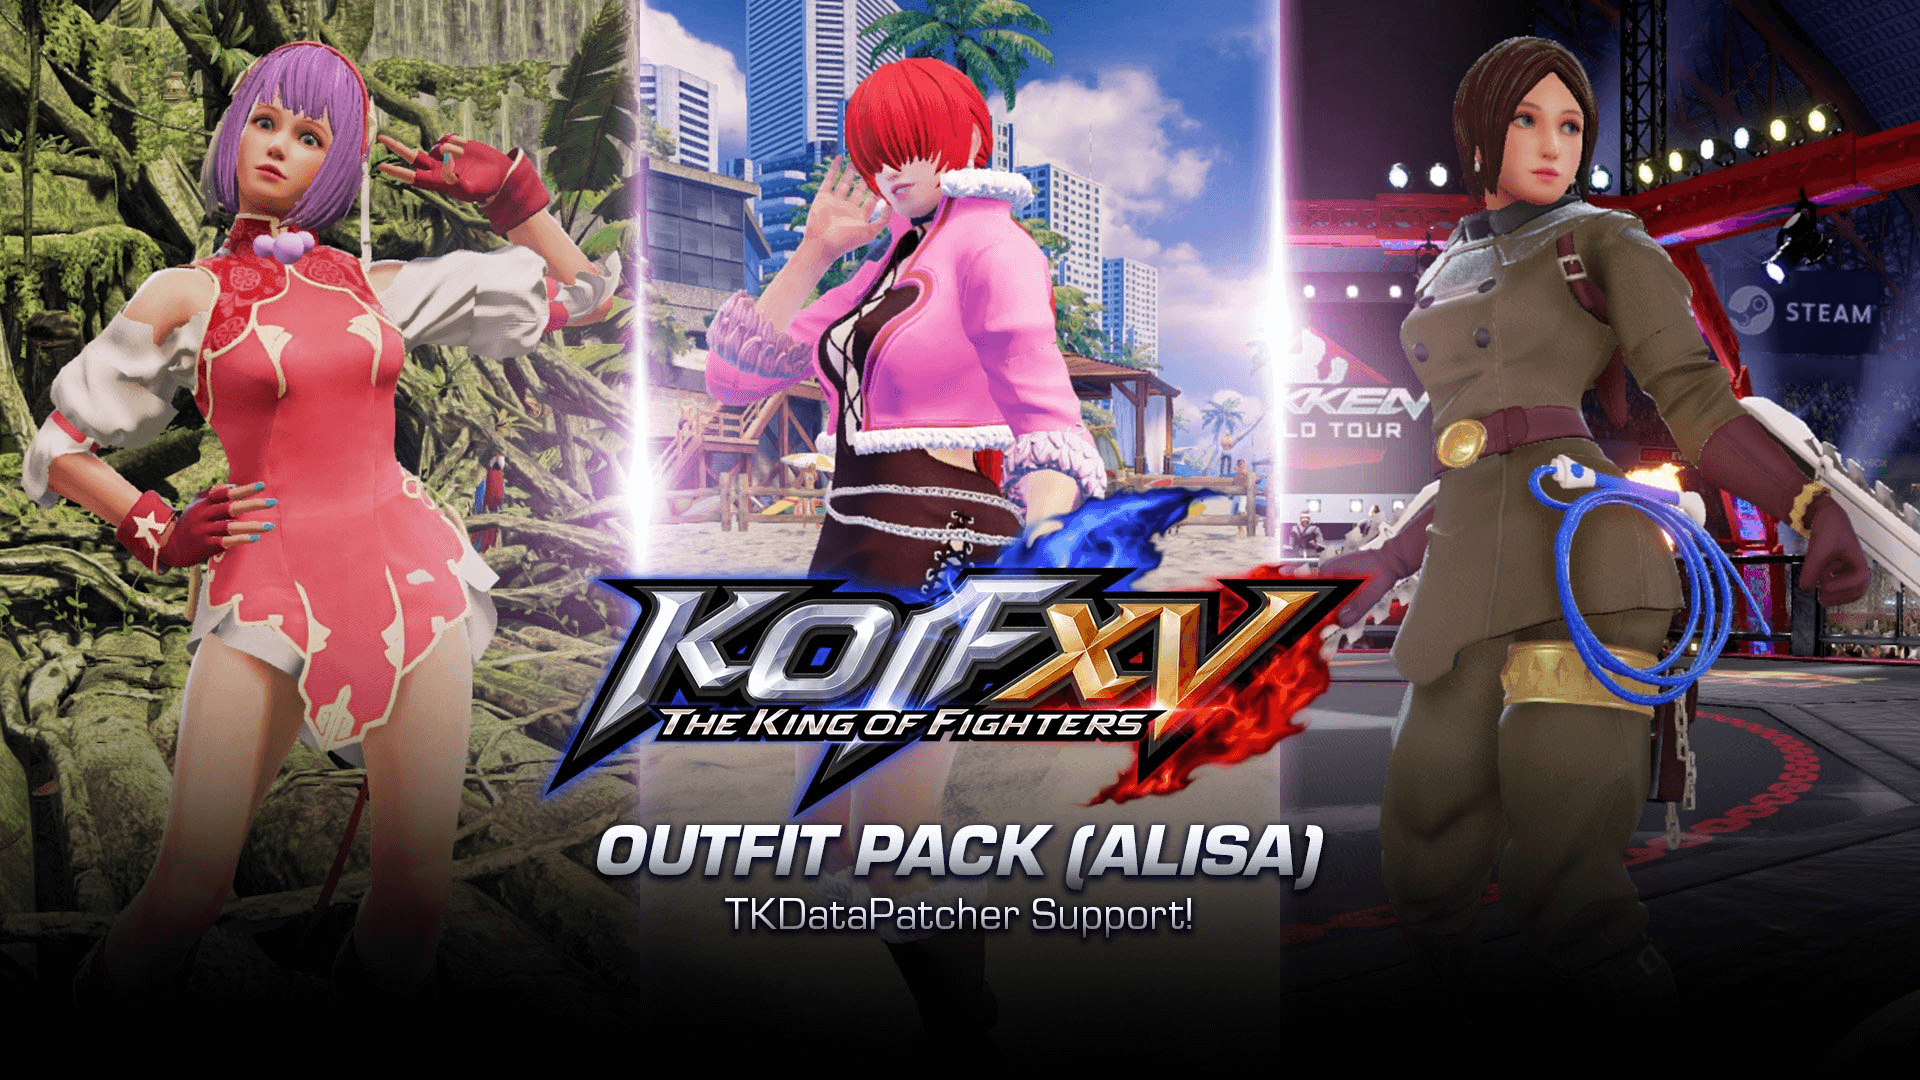 Review: The King of Fighters XIII - Slant Magazine